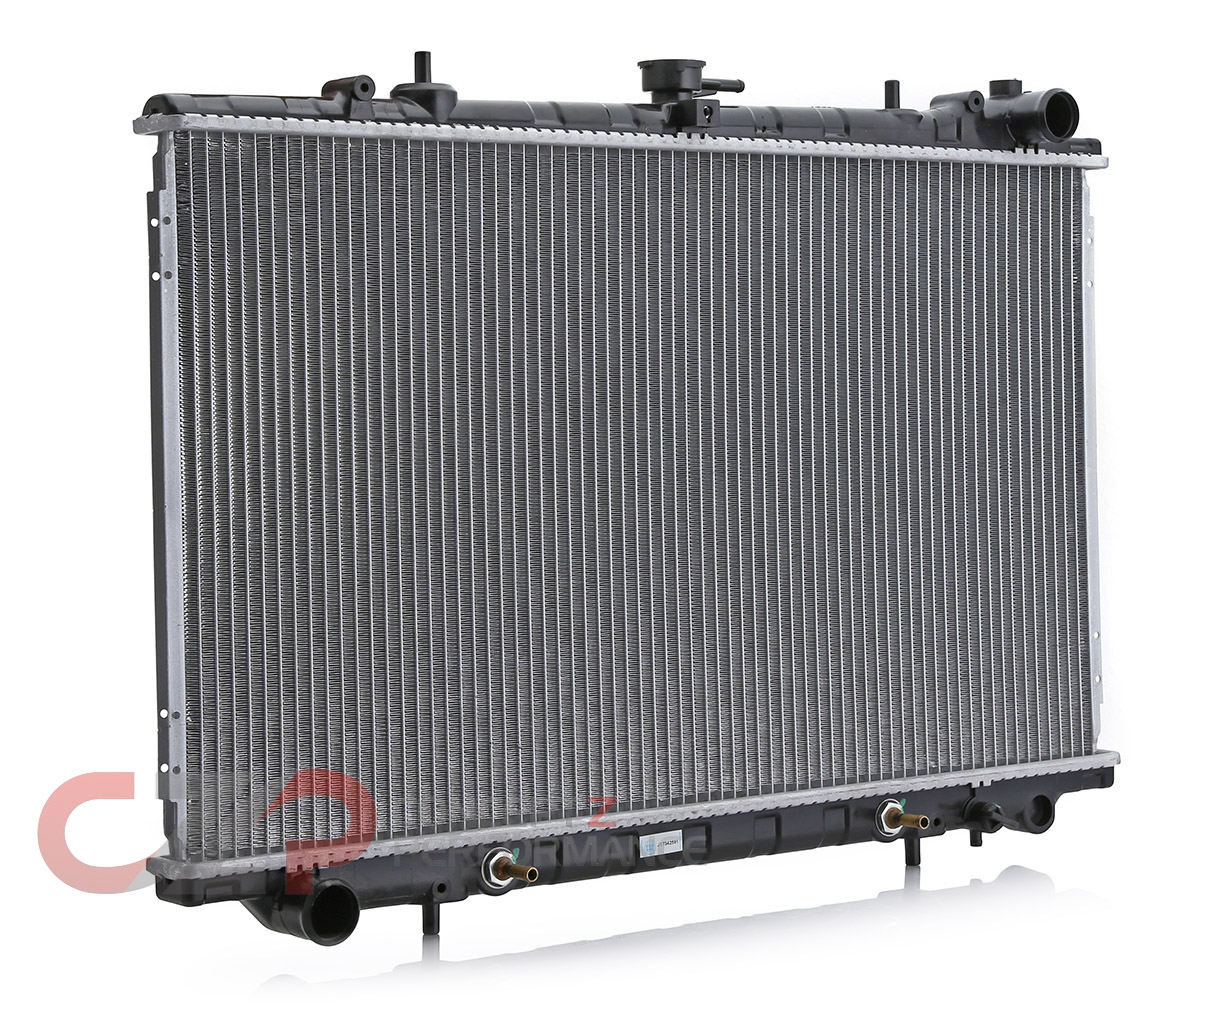 CSF OEM Replacement Radiator Non-Turbo NA, 0.5" Core - Nissan 300ZX 90-96 Z32